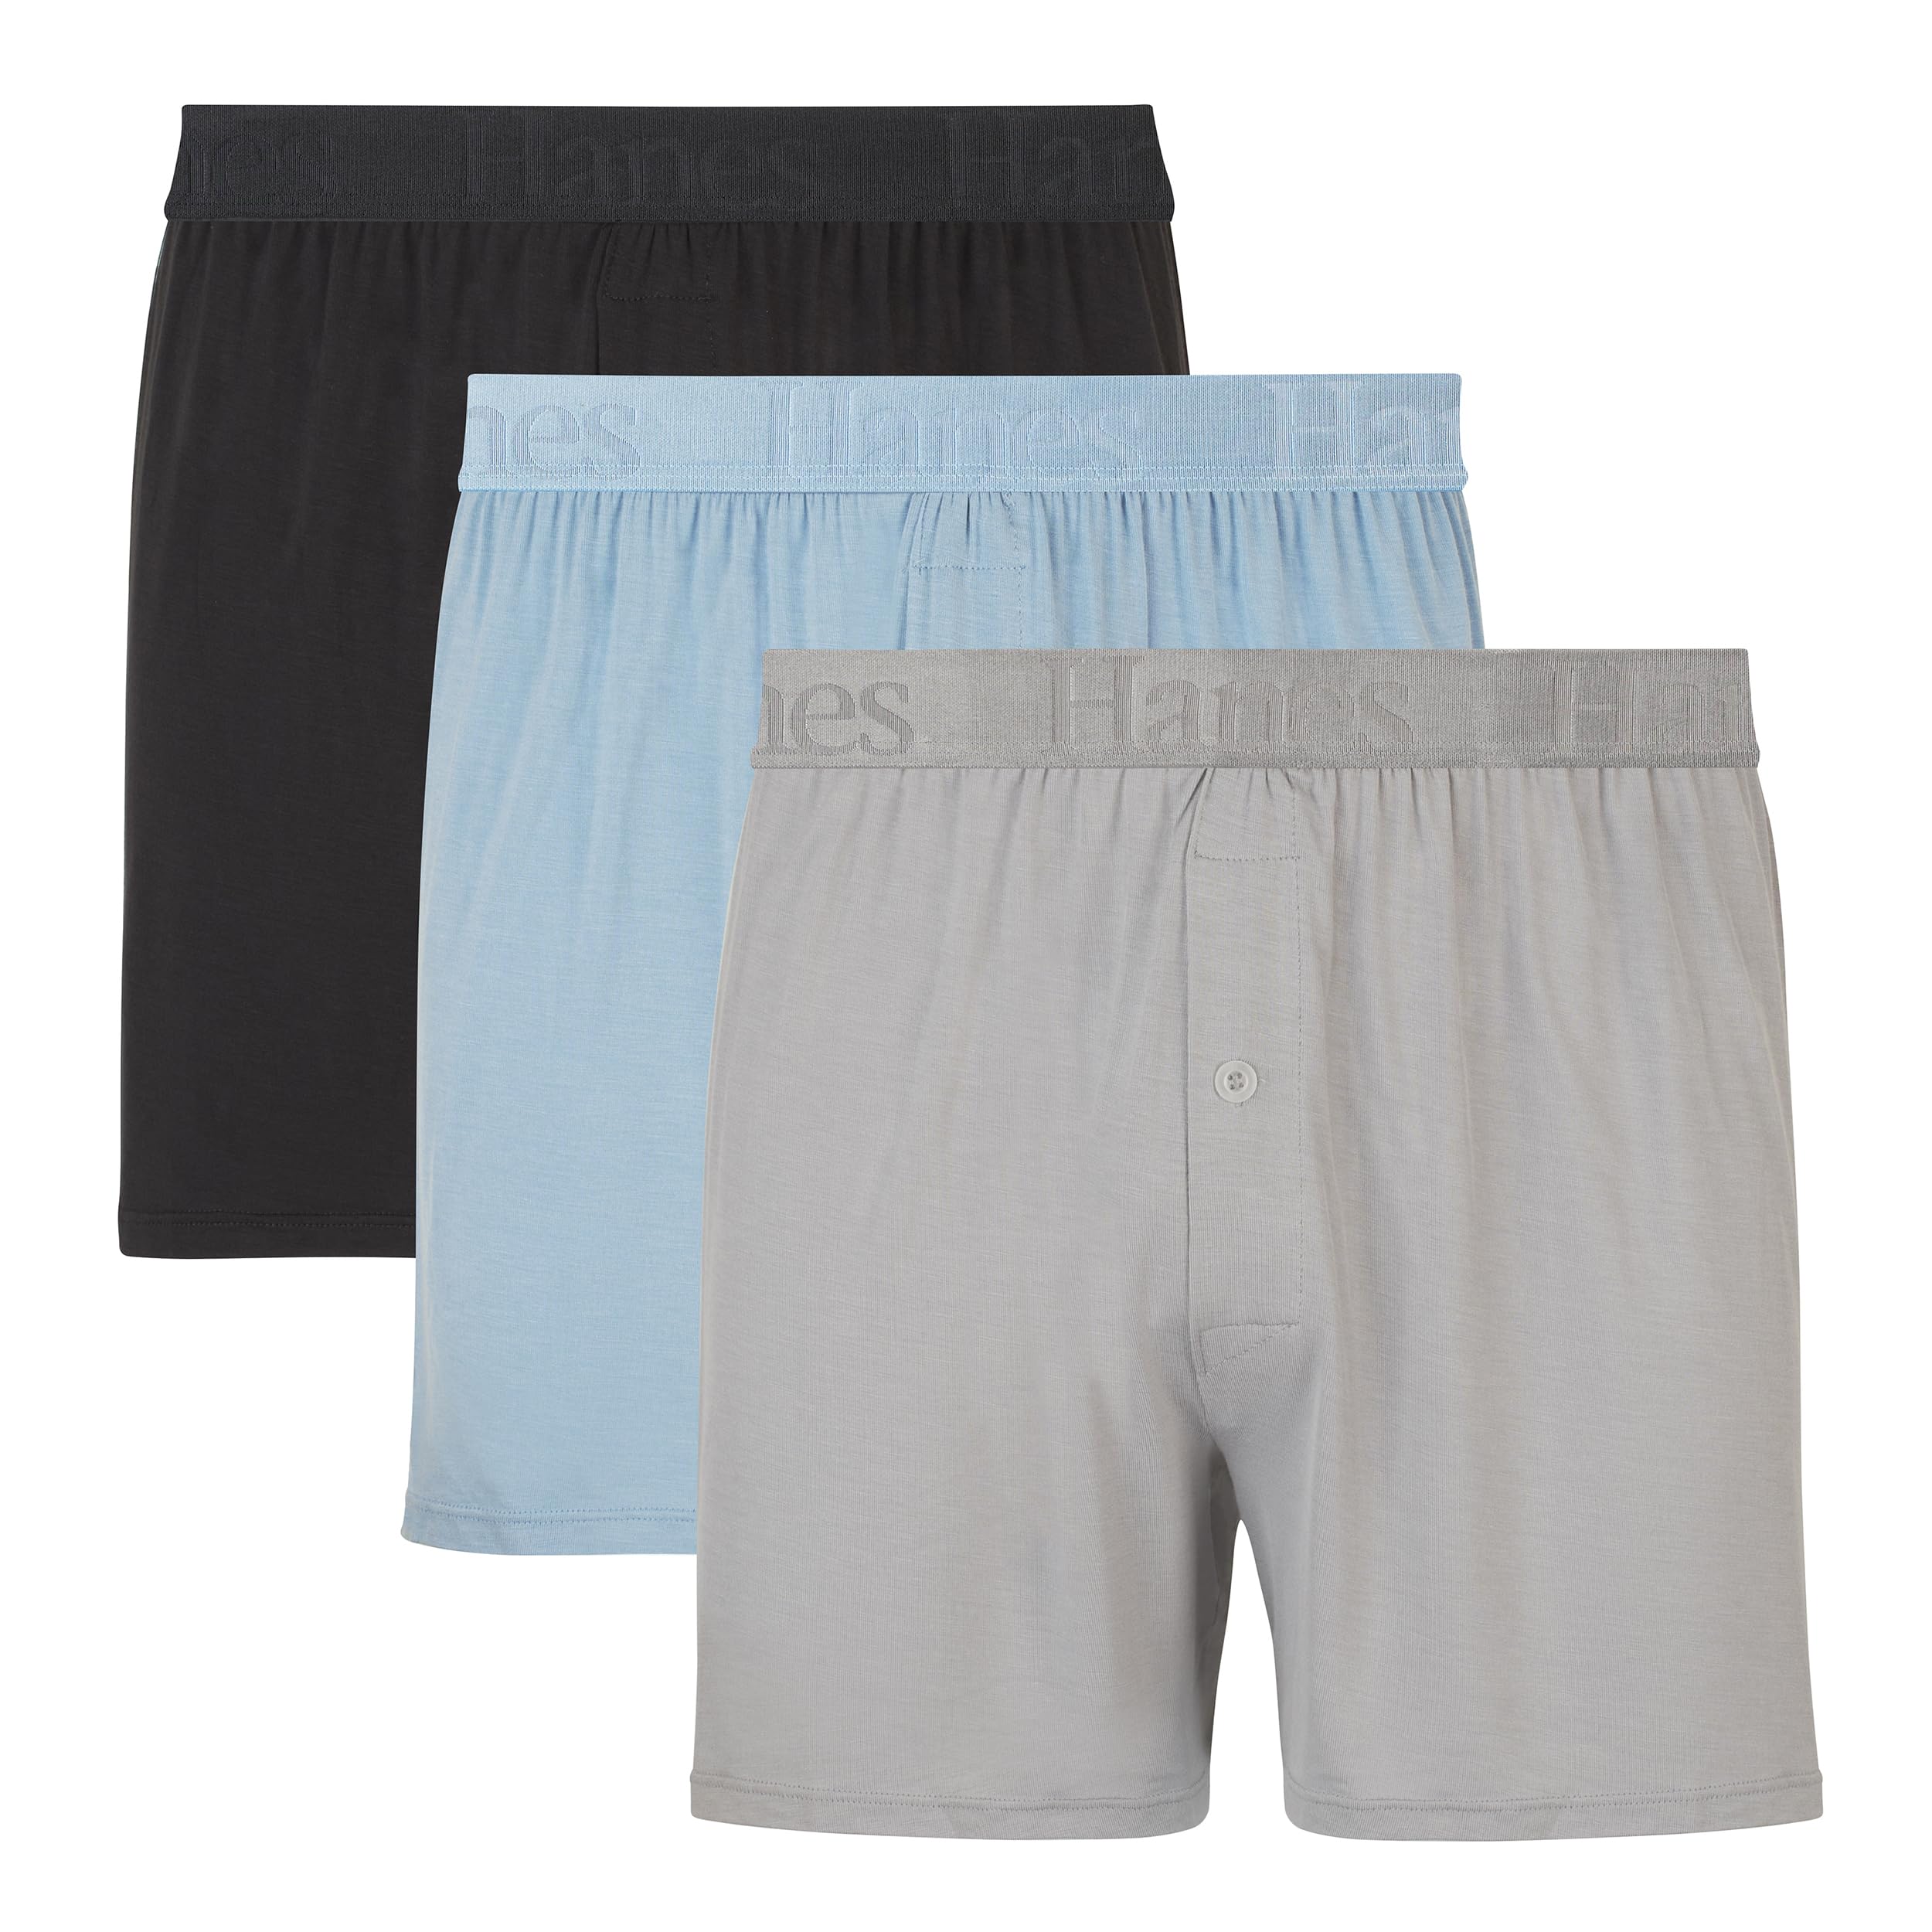 Hanes Men’s Originals SuperSoft Knit Boxers, SuperSoft Bamboo from Viscose Underwear, 3-pack